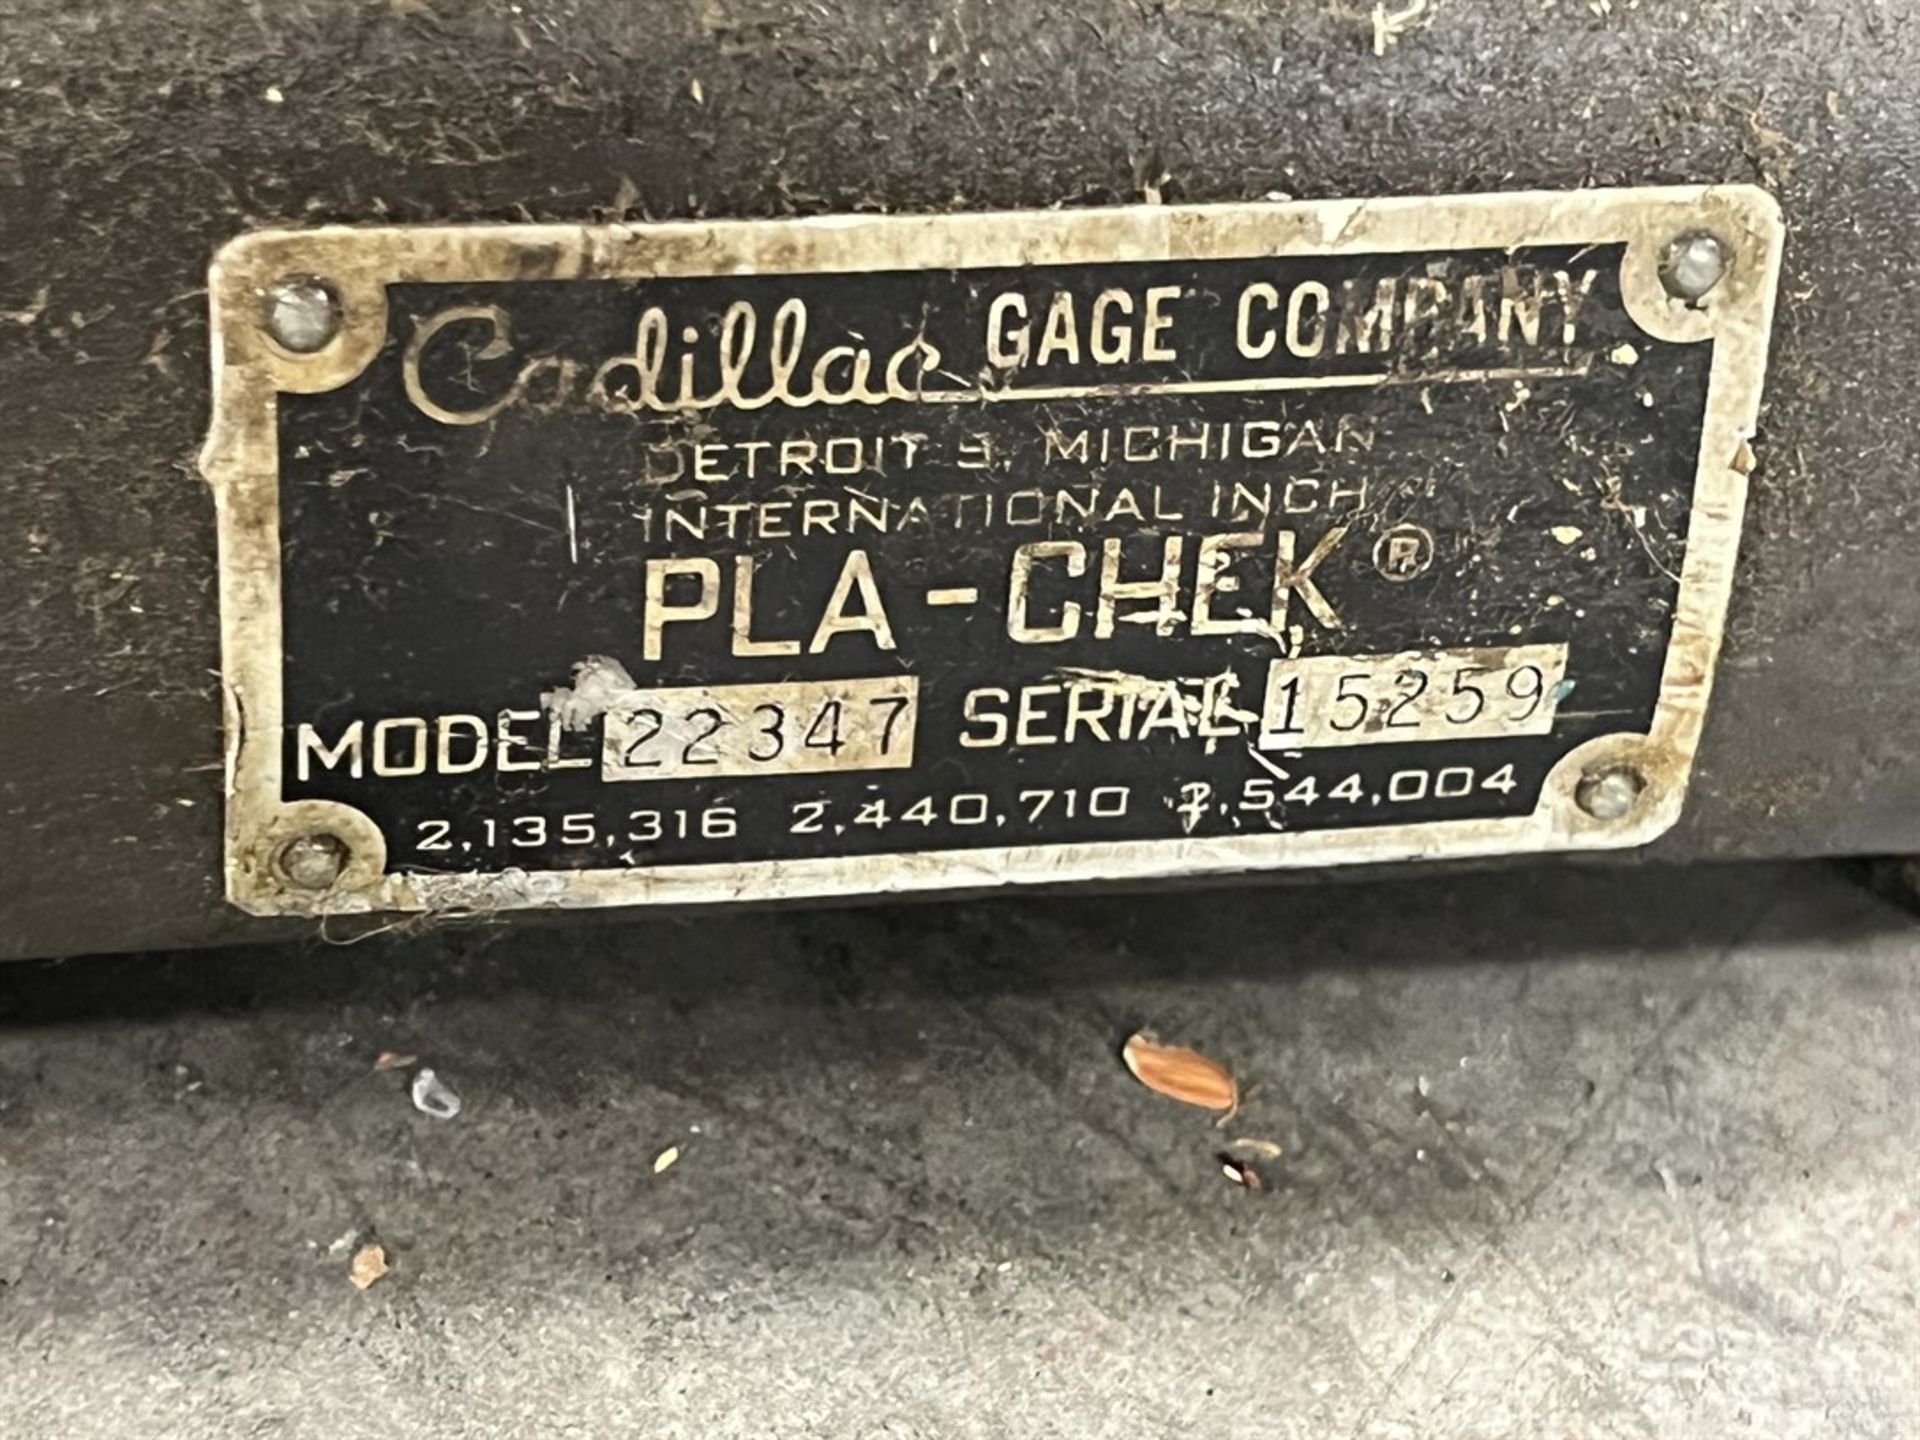 CADILLAC Pla-Check 22347 Height Gage, s/n 15259, 24" - Image 4 of 4